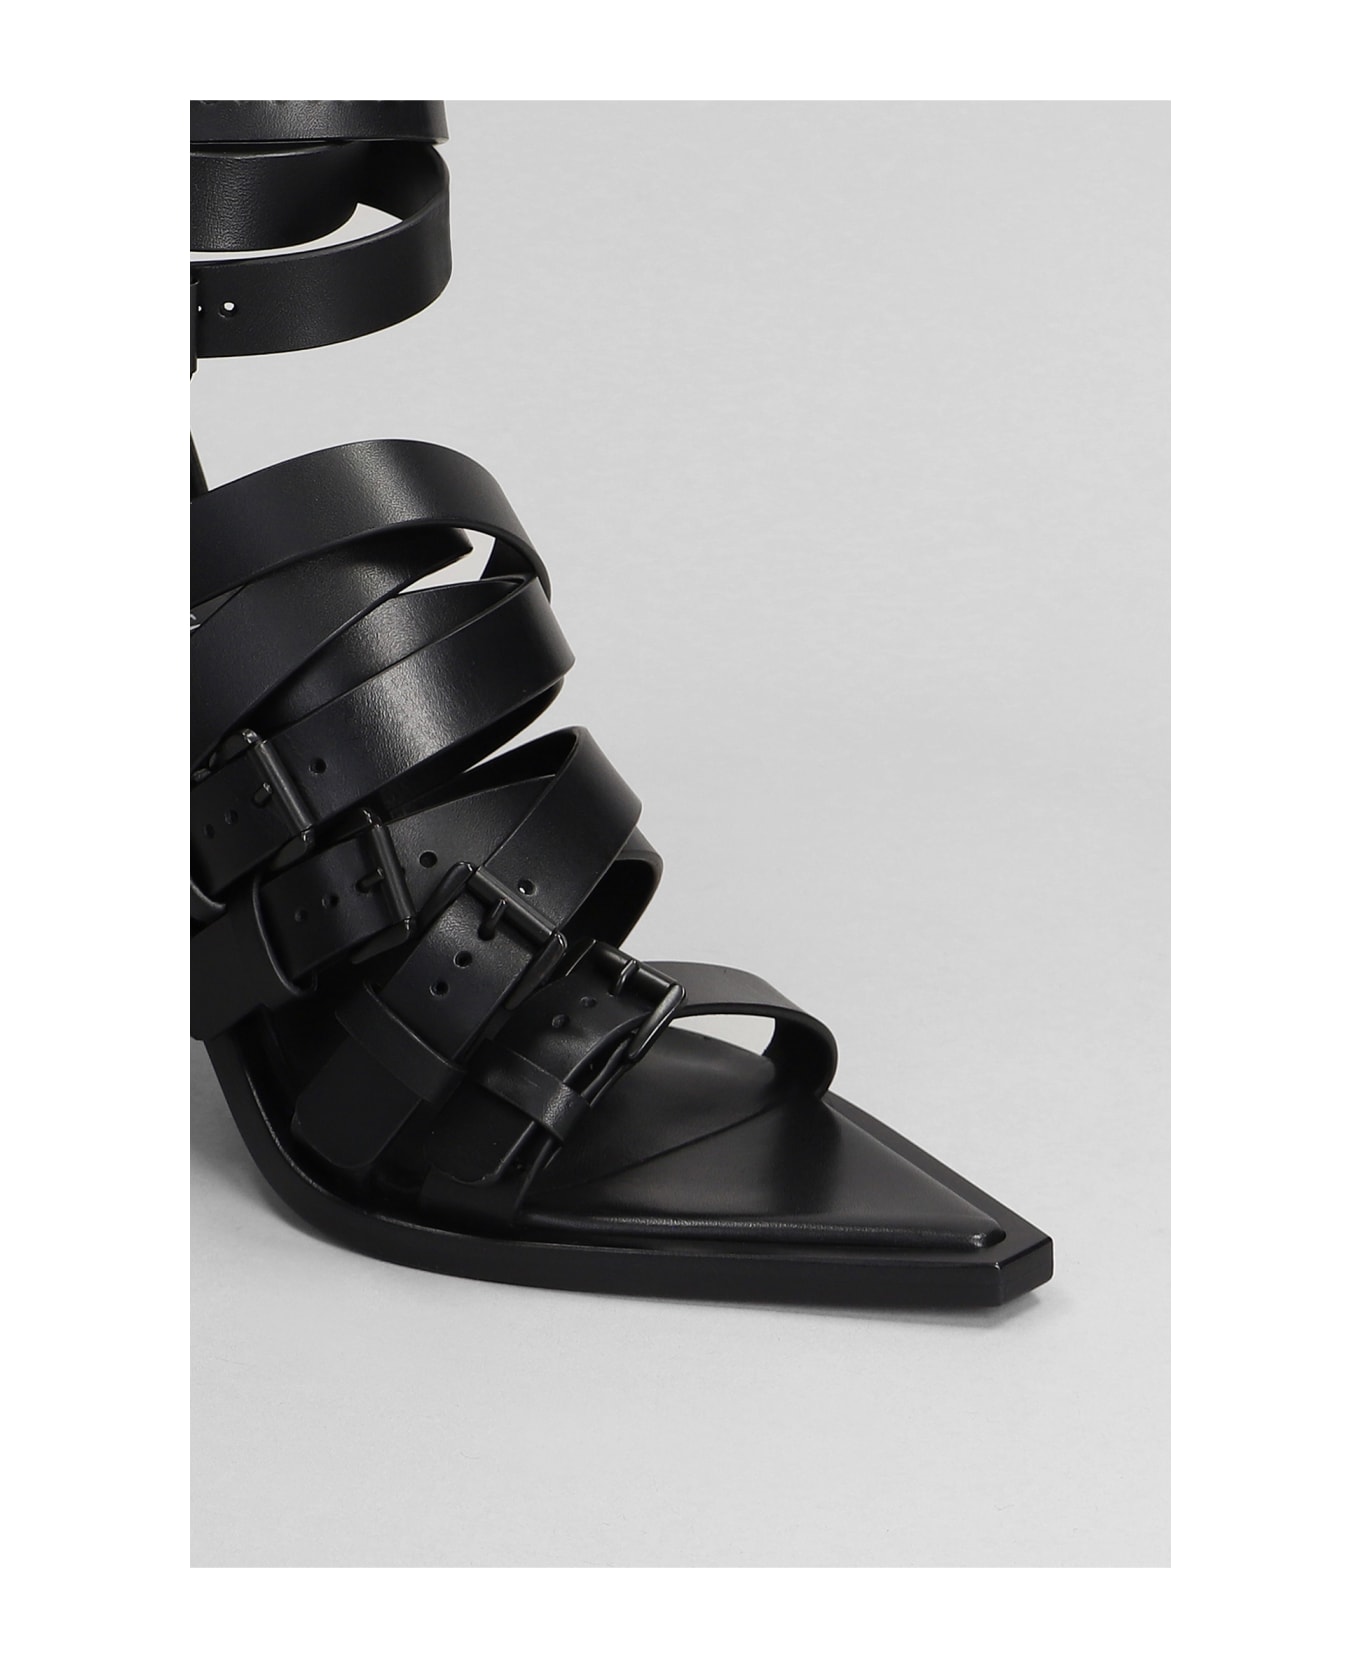 Ann Demeulemeester Sandals In Black Leather - black サンダル